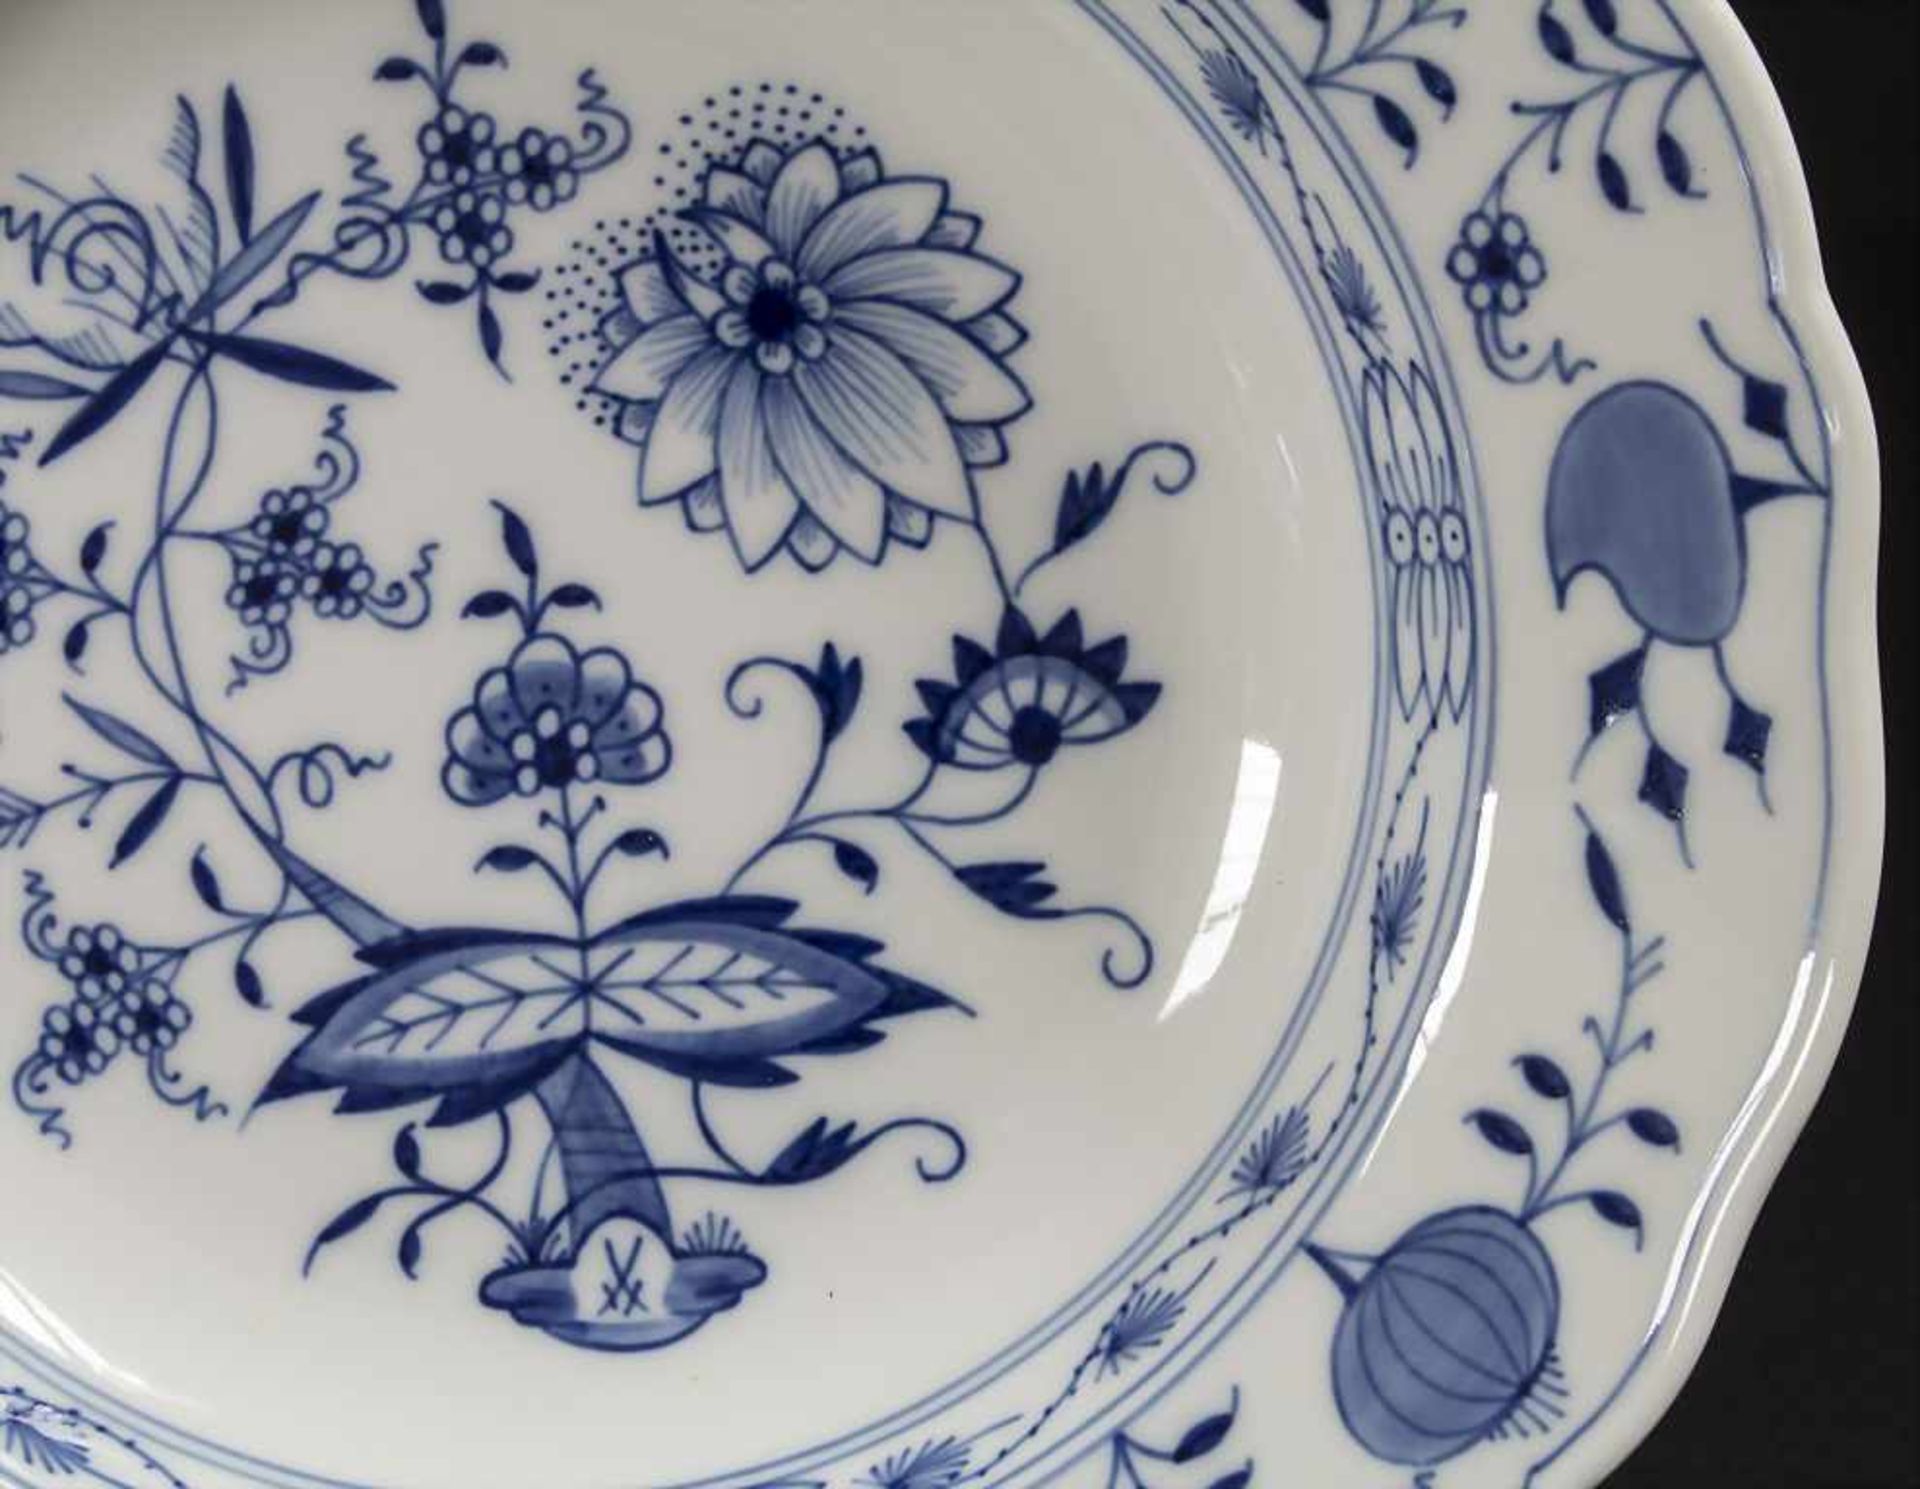 28 tlg. Service 'Zwiebelmuster' / A 28-piece dinner set with 'Onion Pattern', Meissen, 20. Jh. - Image 7 of 17